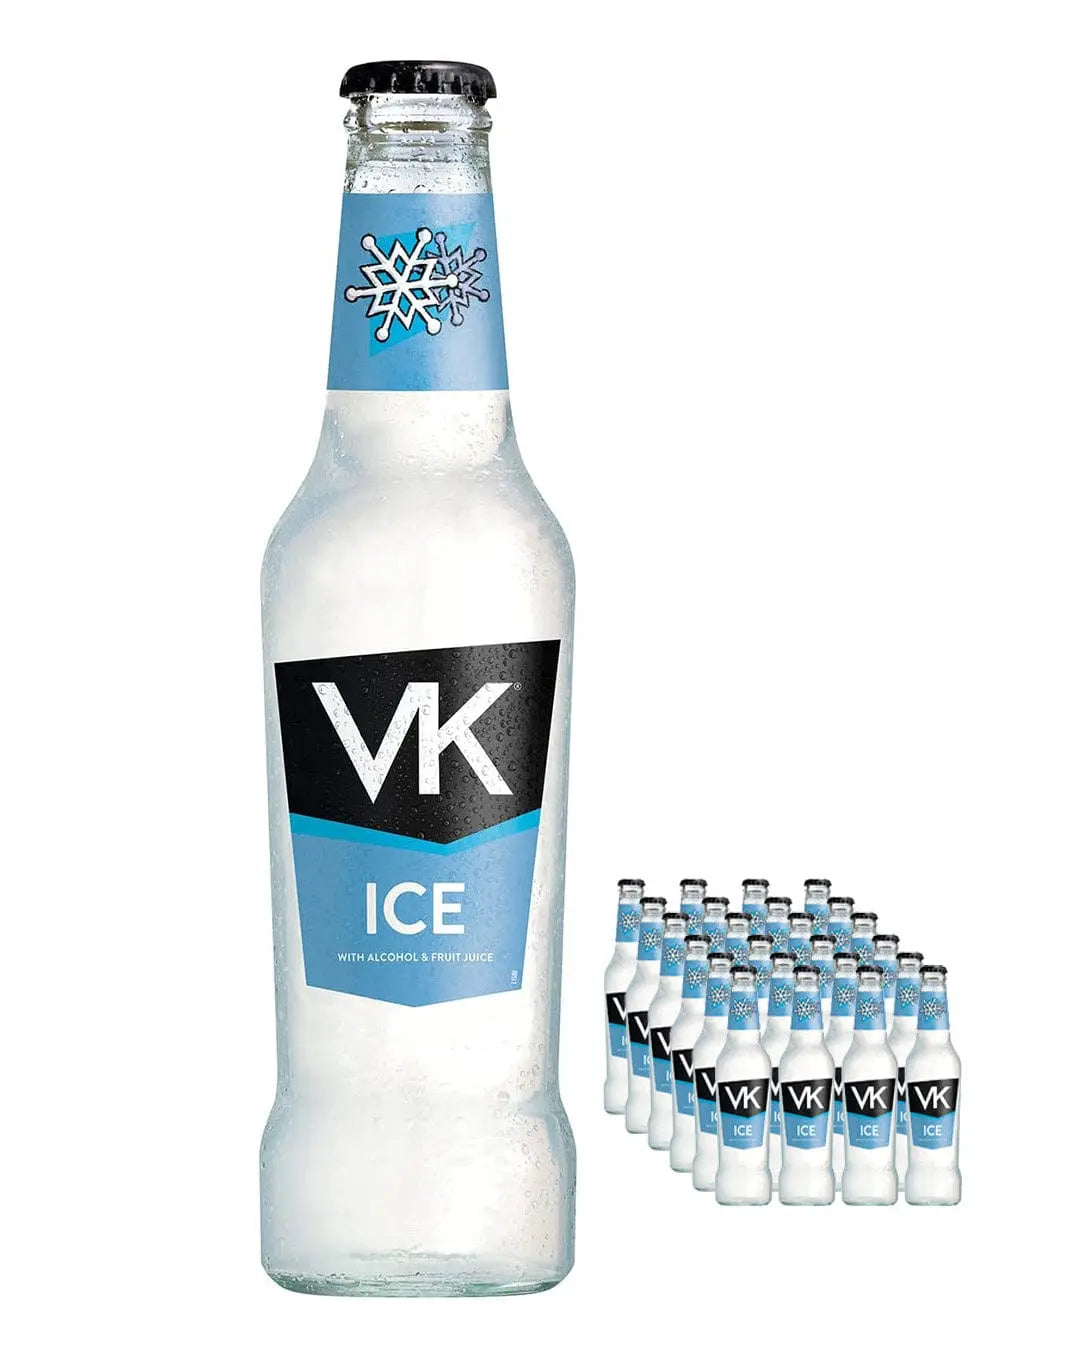 VK Ice Premixed Cocktail Vodka Drink Multipack, 24 x 275 ml Ready Made Cocktails